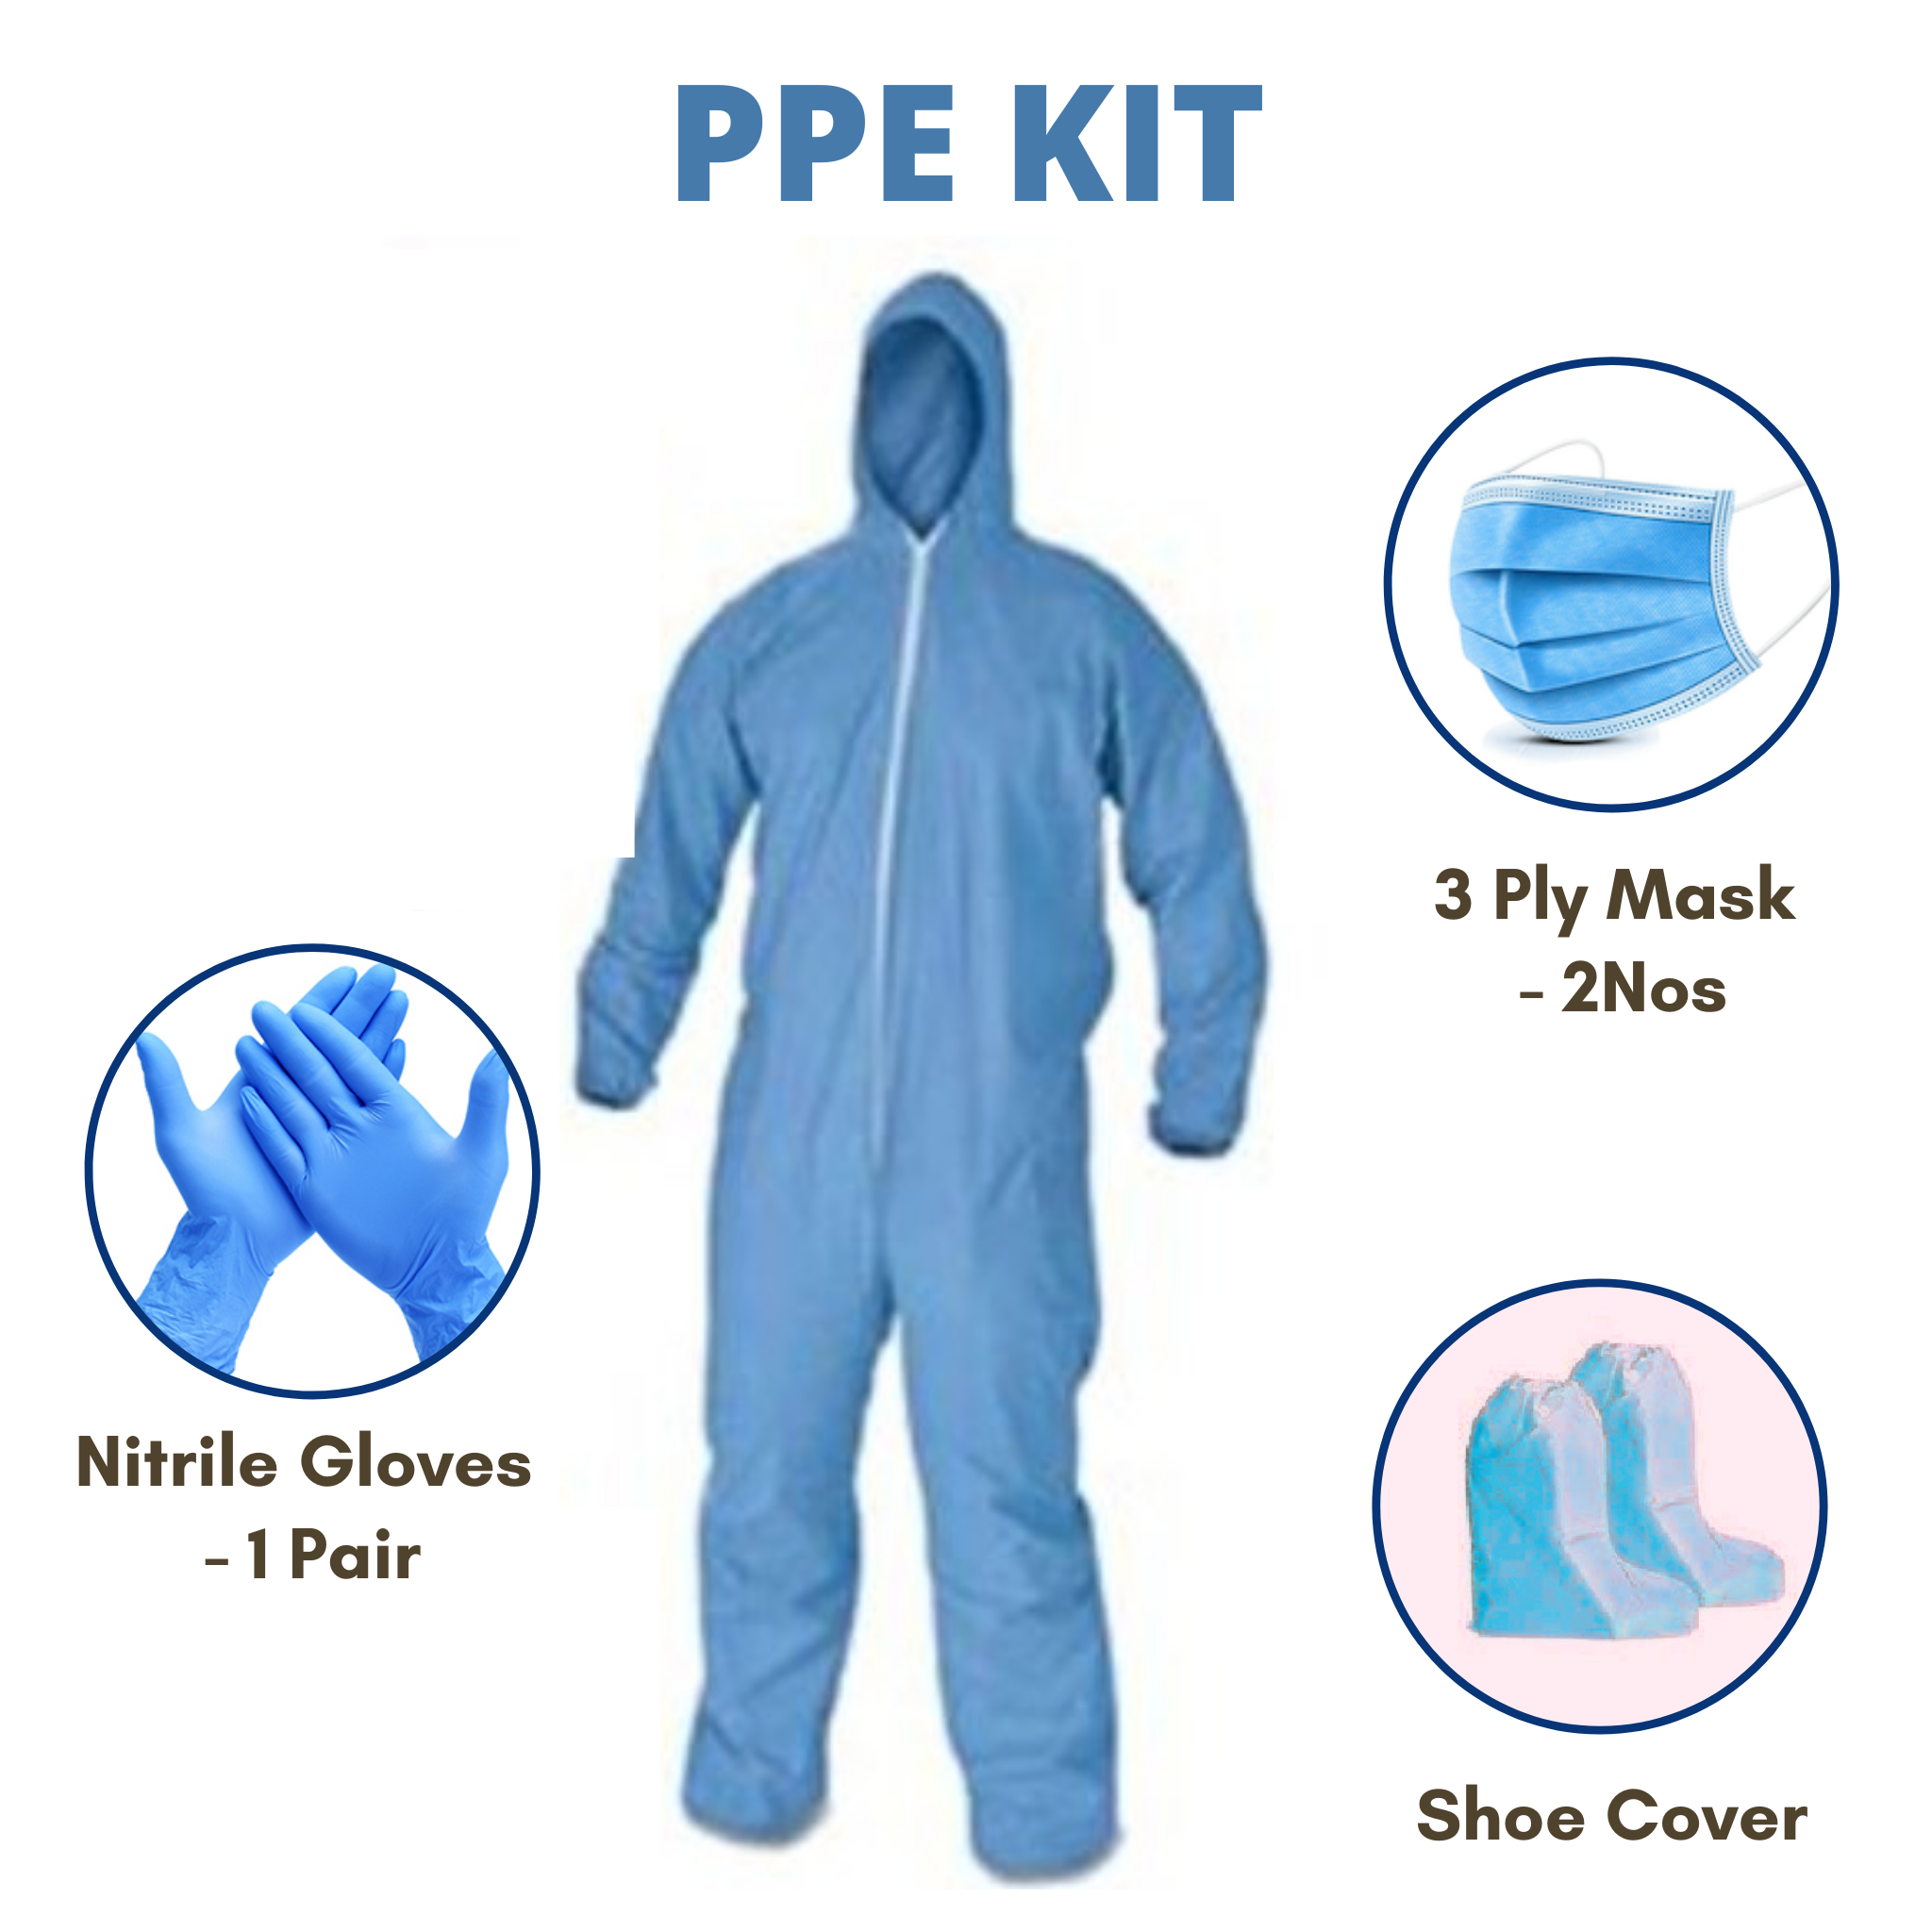 Buy Personal Protective Equipment is designed specially to help protect you against harmful viruses, bacteria and infections